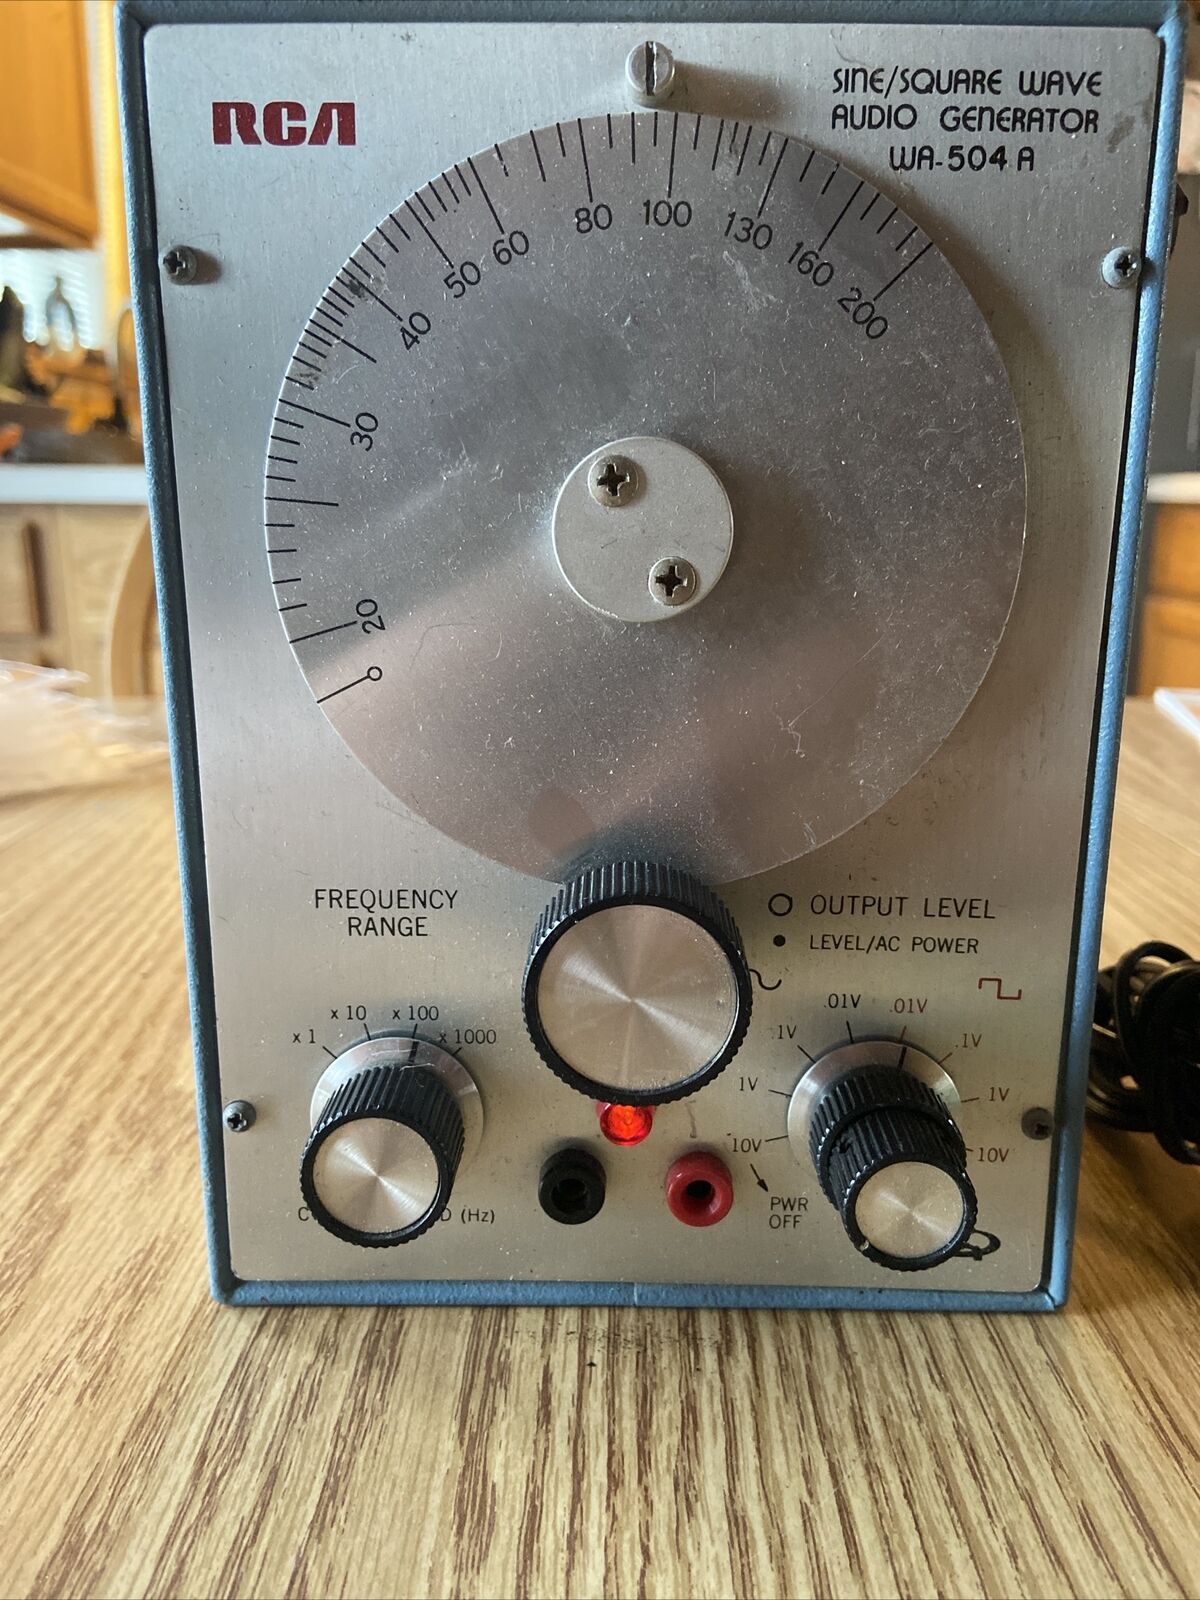 Vintage Rca Sine / Square Wave Audio Generator, Type Wa-504a, Solid State